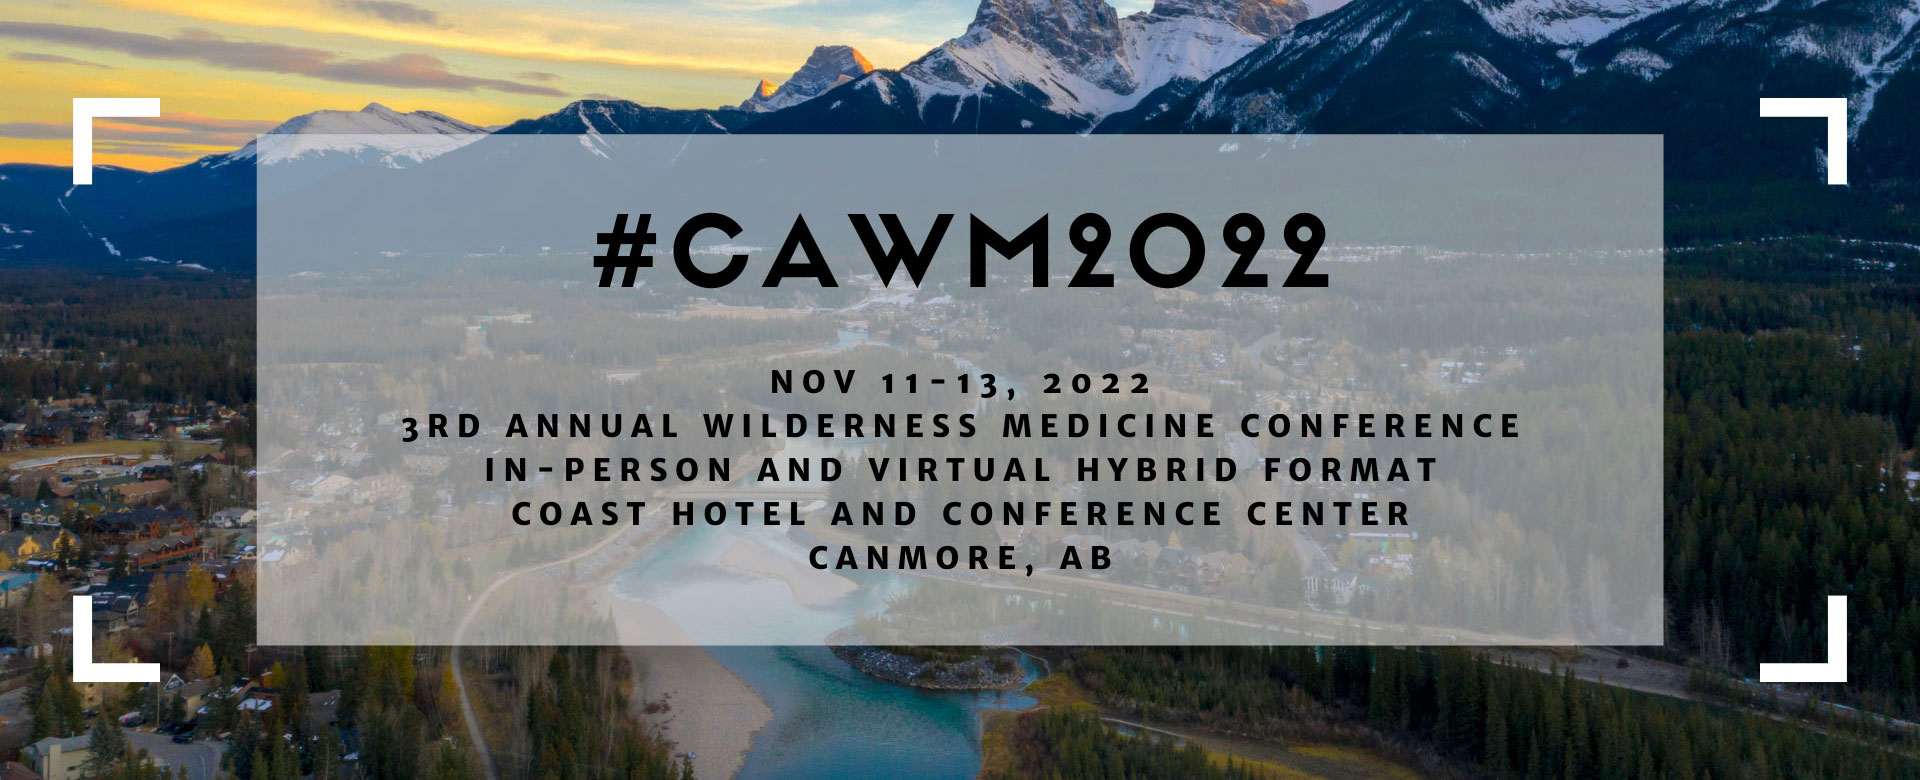 CAWM 2022 - Nov 11-13 2022. Third annual wilderness medicine conference. In-person and virtual hybrid format. Coast Hotel and Conference Center. Canmore, AB.